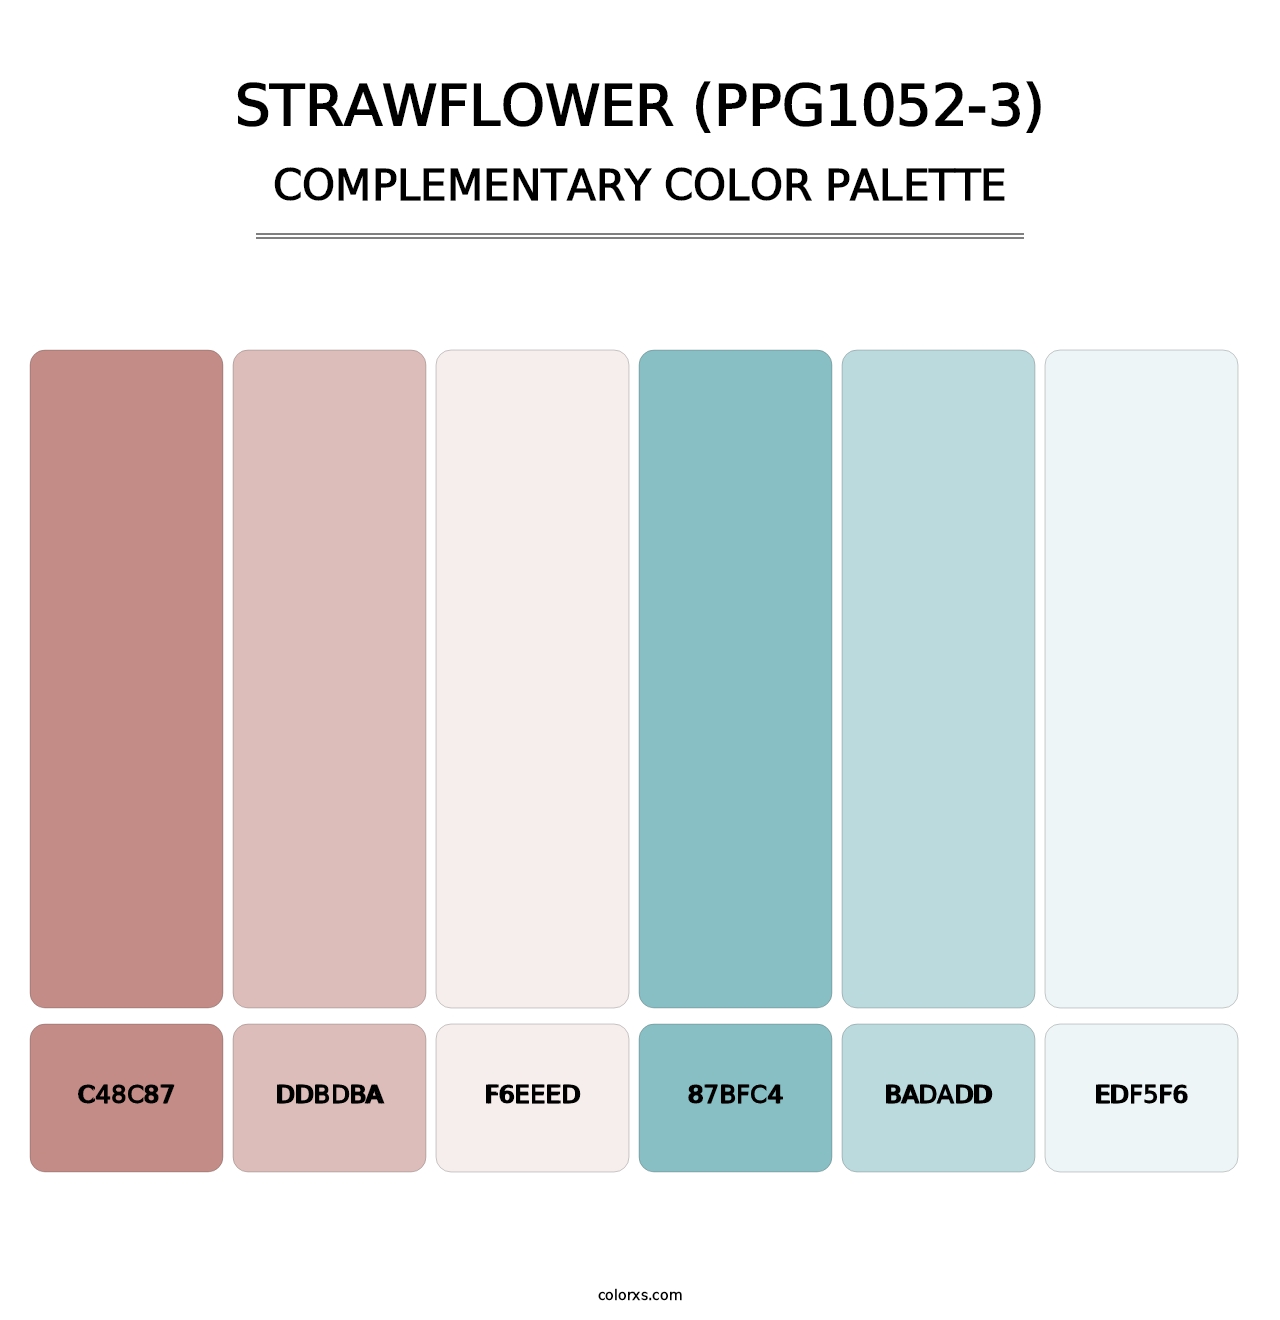 Strawflower (PPG1052-3) - Complementary Color Palette